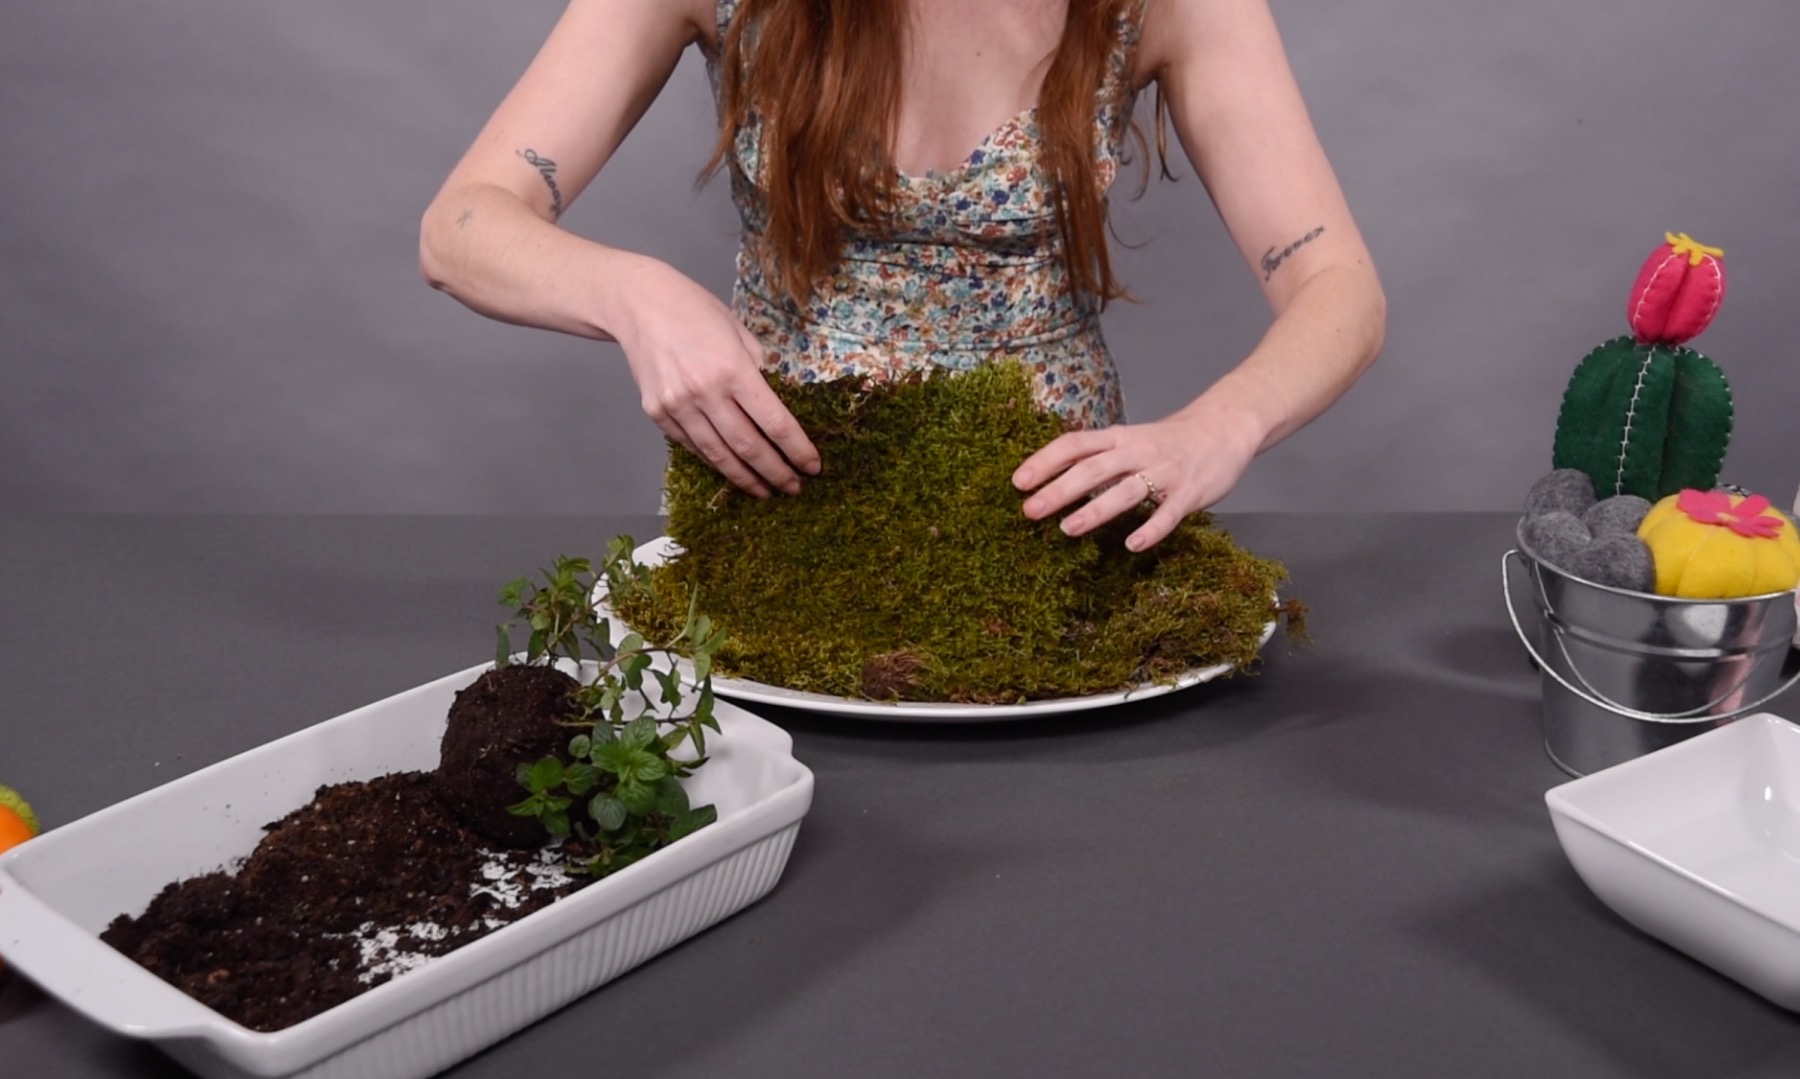 flip your reindeer moss to face the green side out